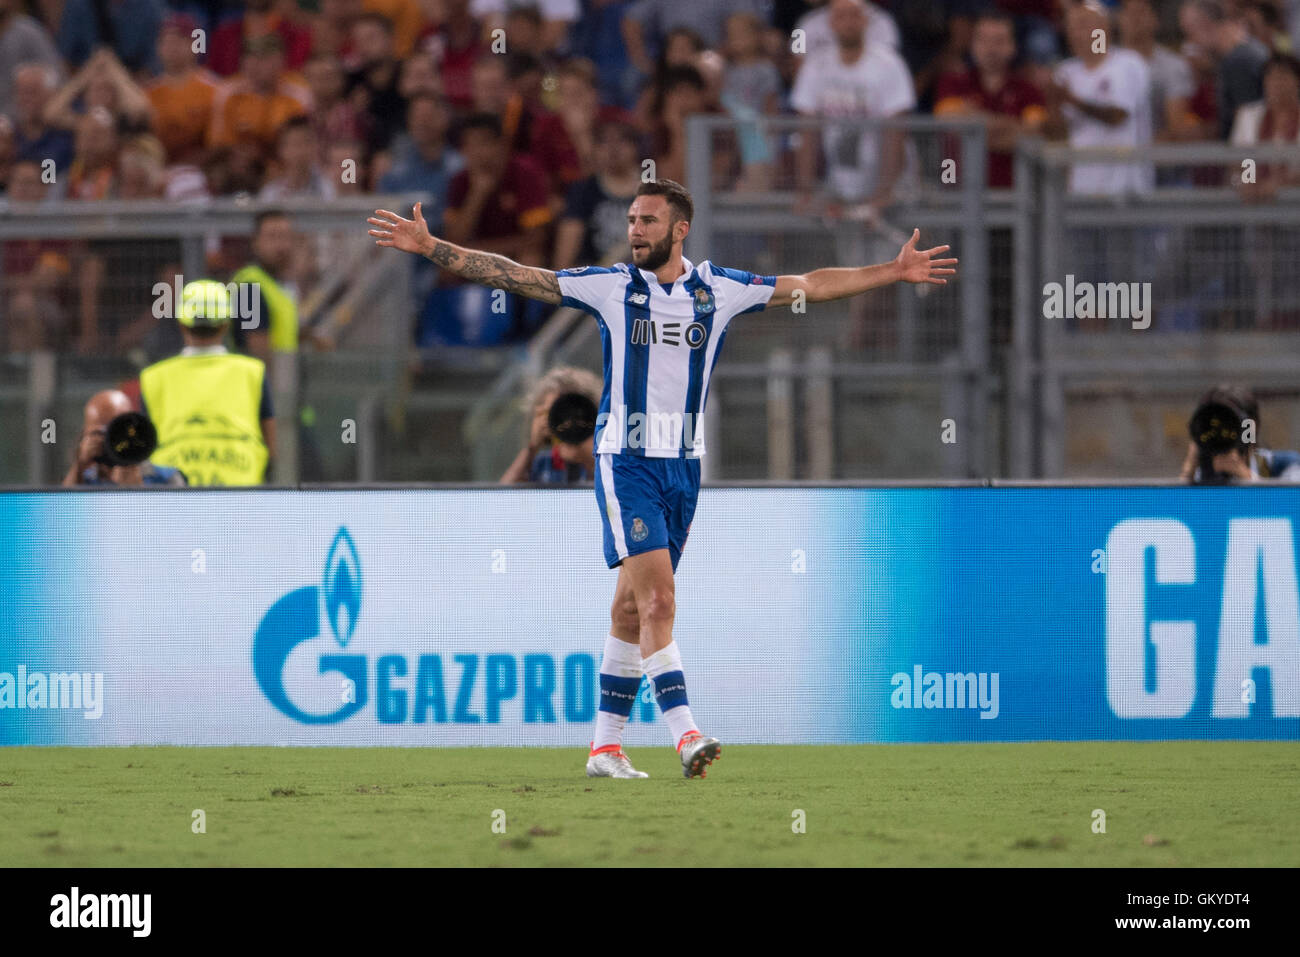 Rome, Italy. 23rd Aug, 2016. Miguel Layun (Porto) Football/Soccer : Miguel Layun of Porto celebrates after scoring their 2nd goal during the UEFA Champions League Play-off 2nd leg match between AC Roma 0-3 FC Porto at Stadio Olimpico in Rome, Italy . © Maurizio Borsari/AFLO/Alamy Live News Stock Photo